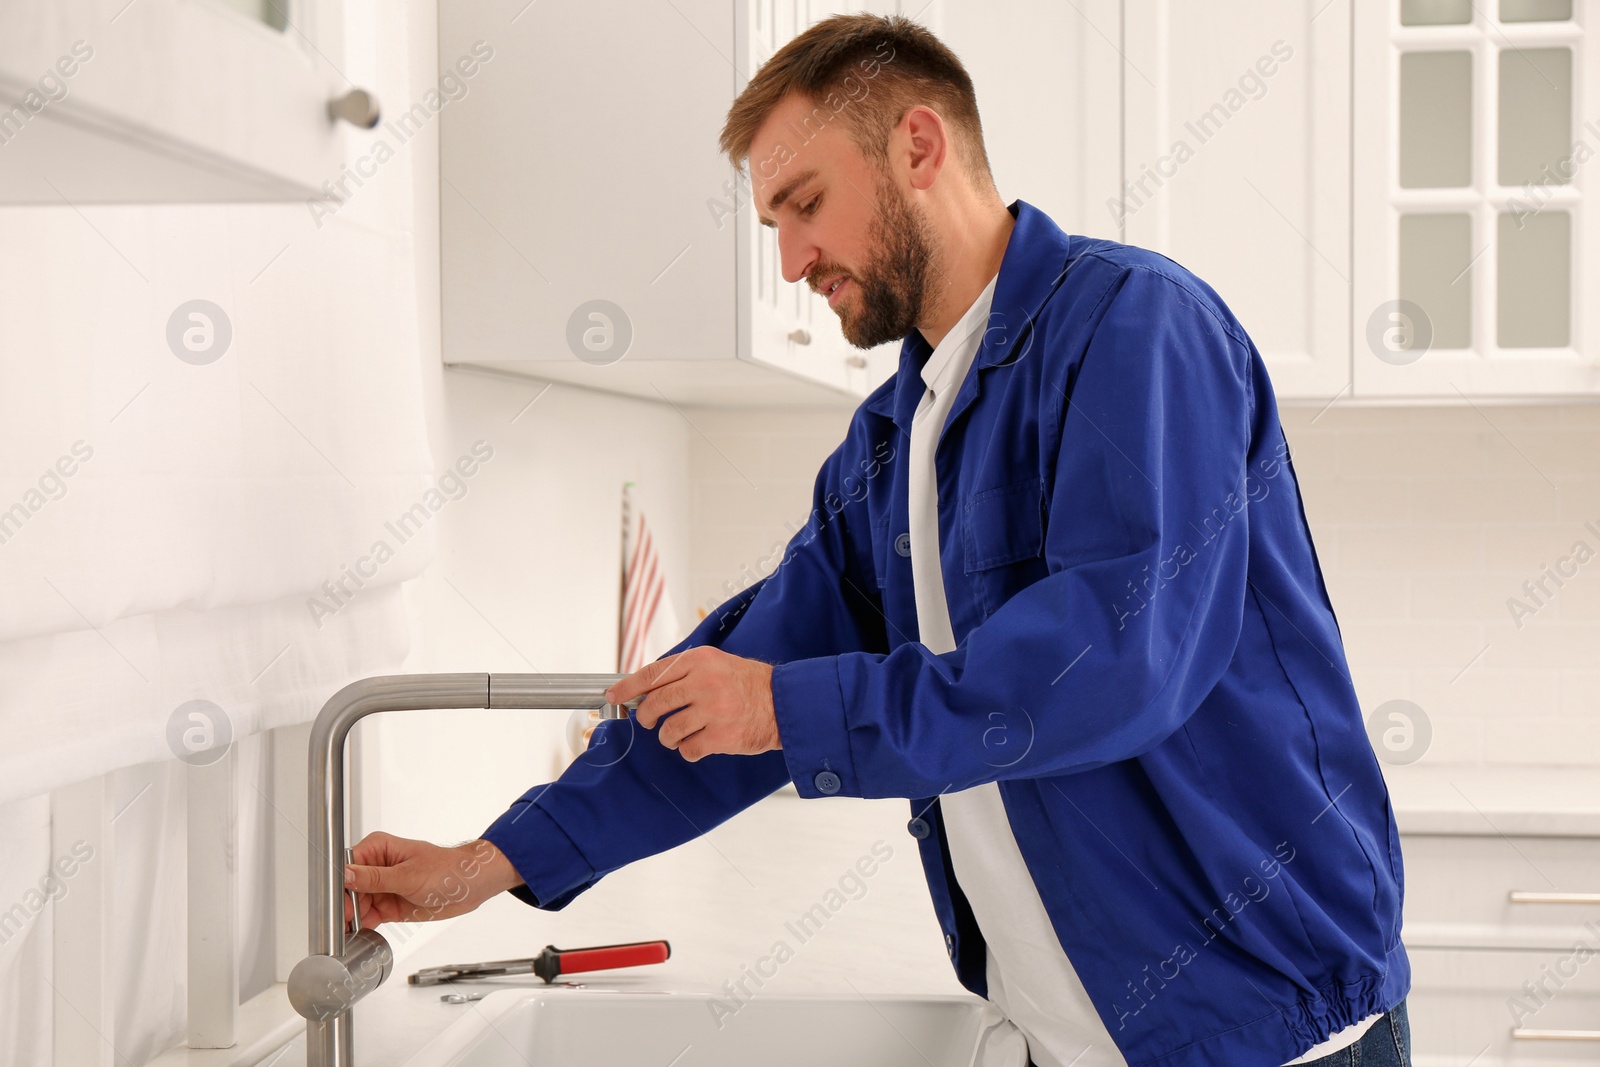 Photo of Plumber checking water tap after installation in kitchen